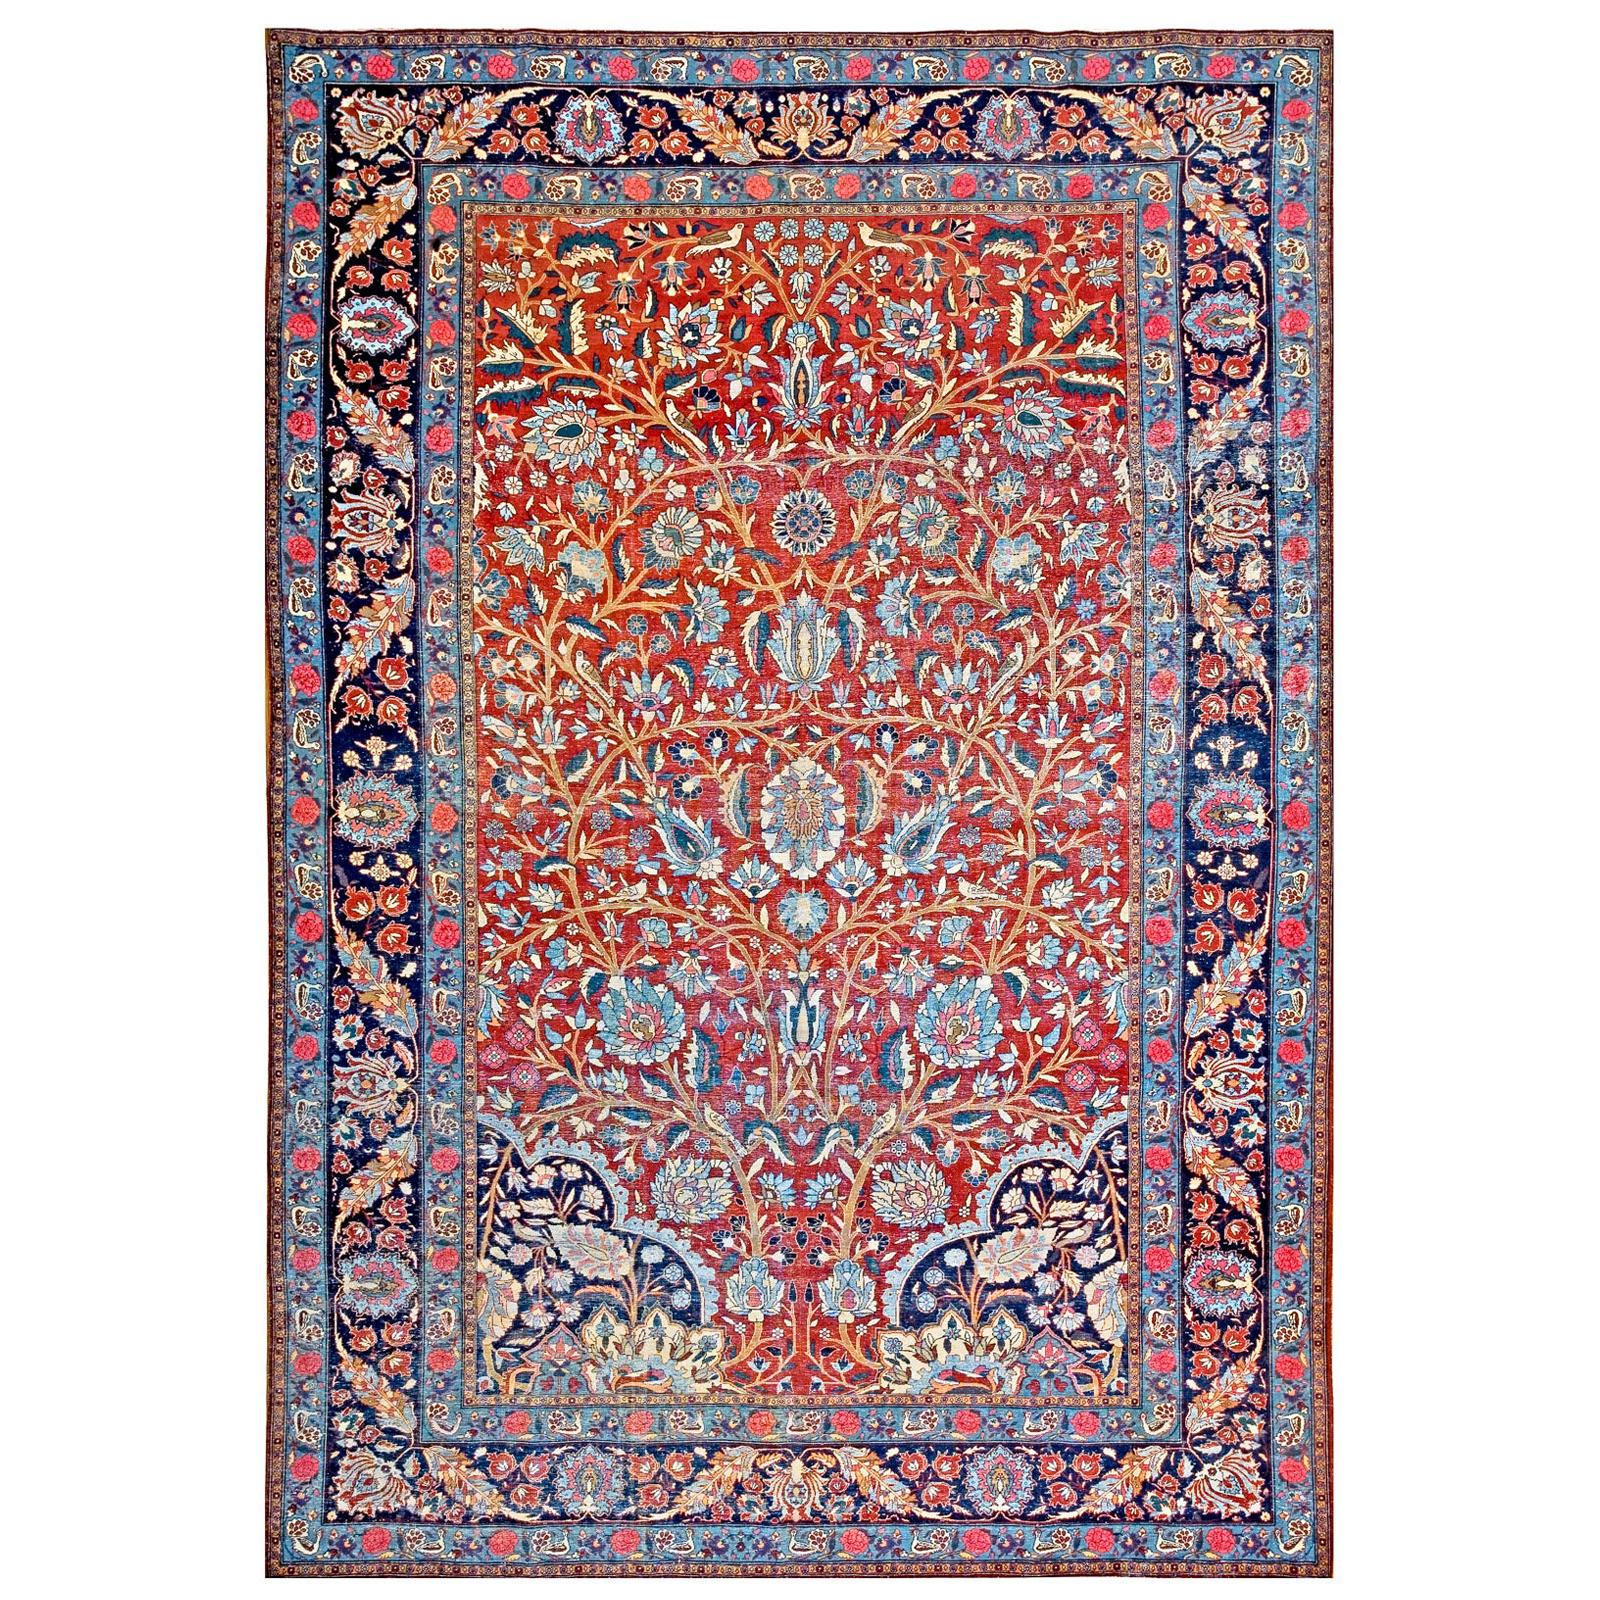 Early 20th Century Persian Tehran Carpet with Silk Highlights (7'x10'-214x305) 